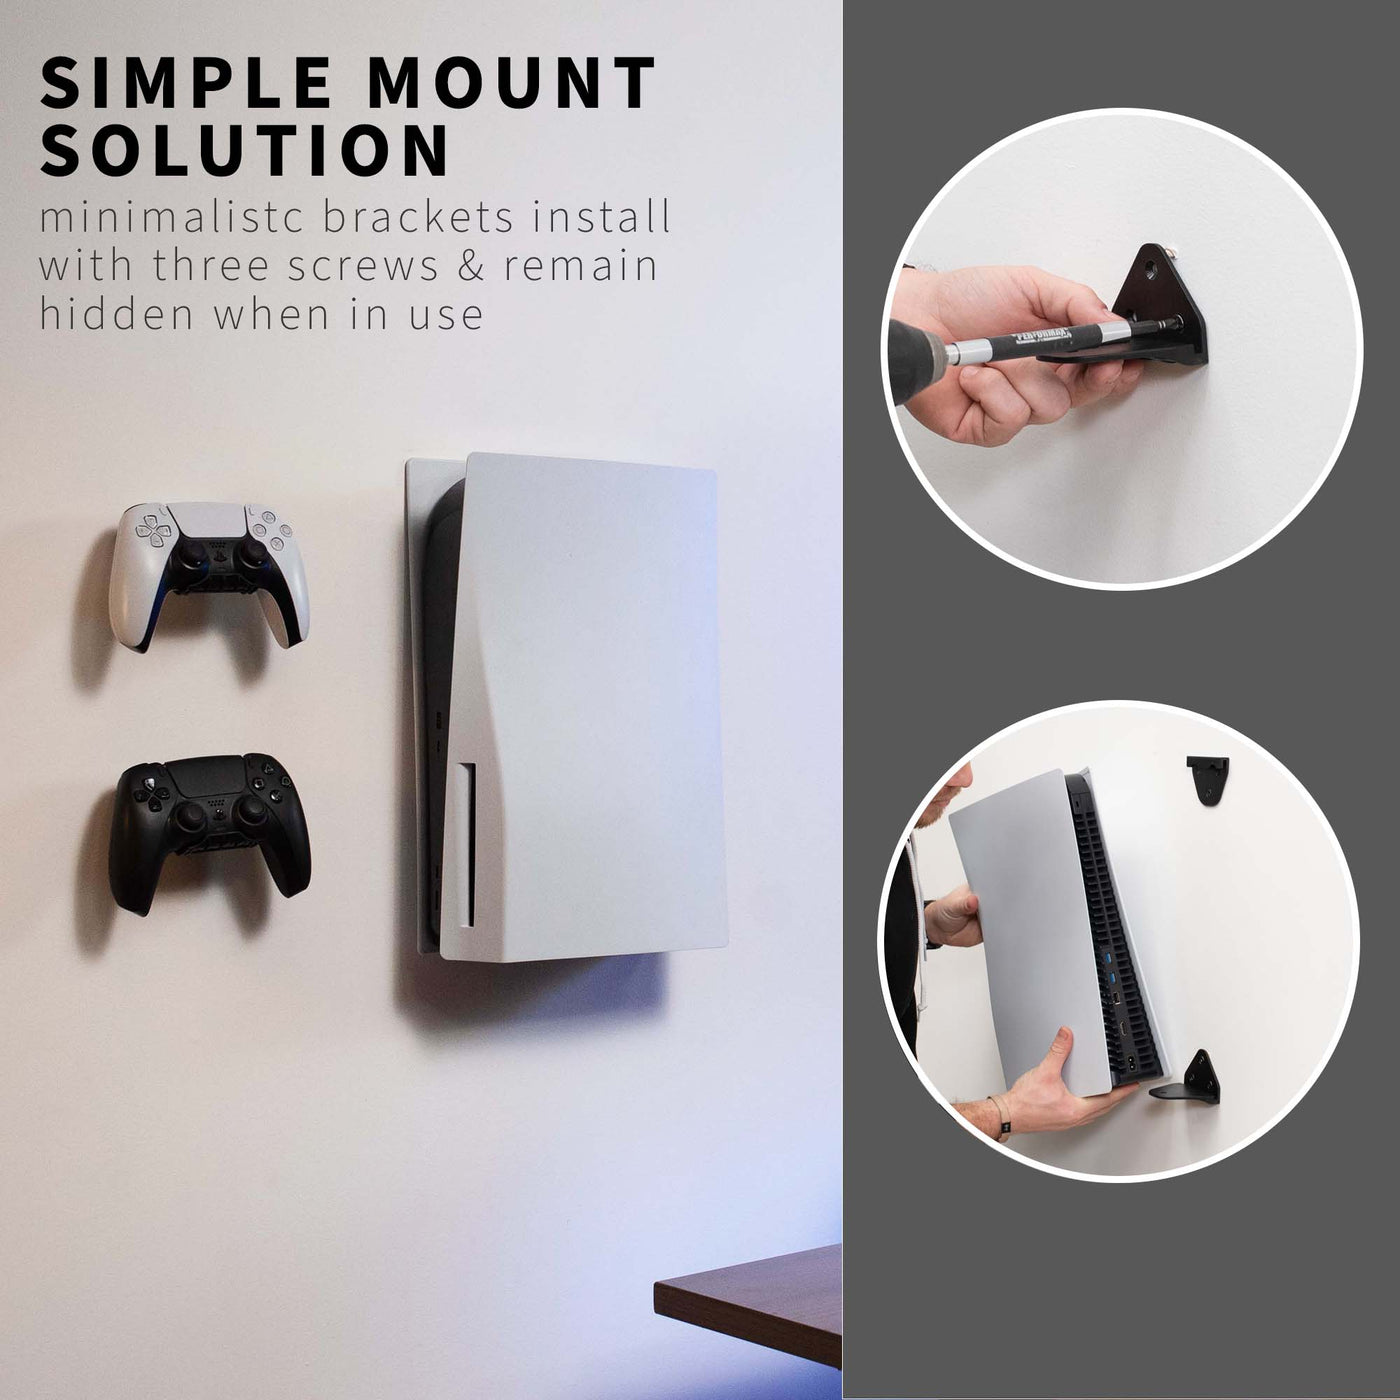 Simple mounting 2 in 1 wall and desk mounts for PS5 plus 2 controller mounts.